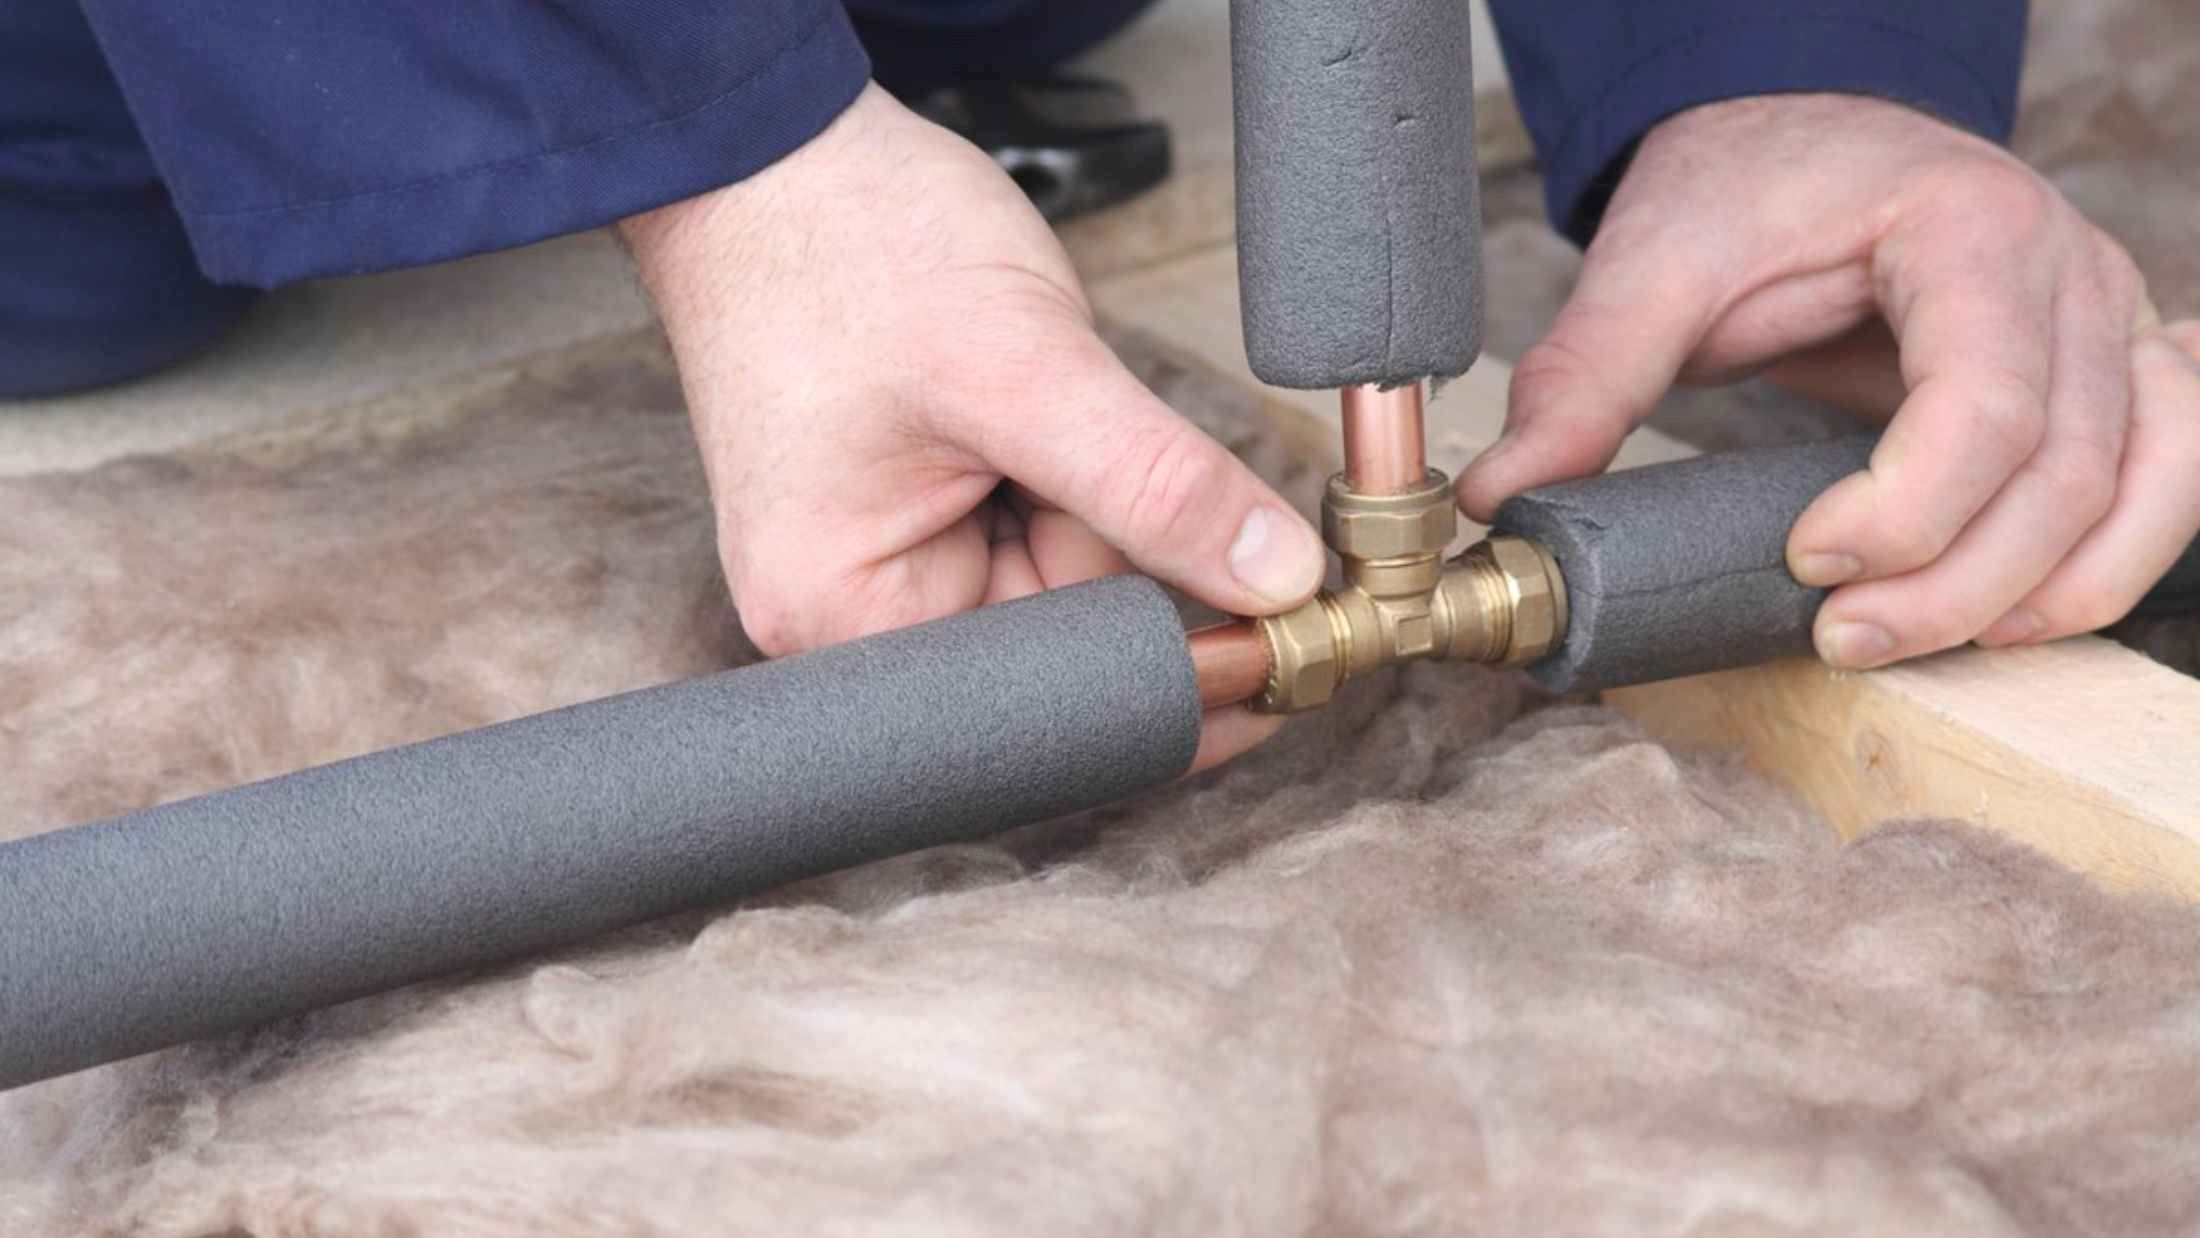 https://www.axa.co.uk/globalassets/new-website/home/tips-and-guides/plumber-connecting-copper-water-pipes.jpg?width=&quality=80